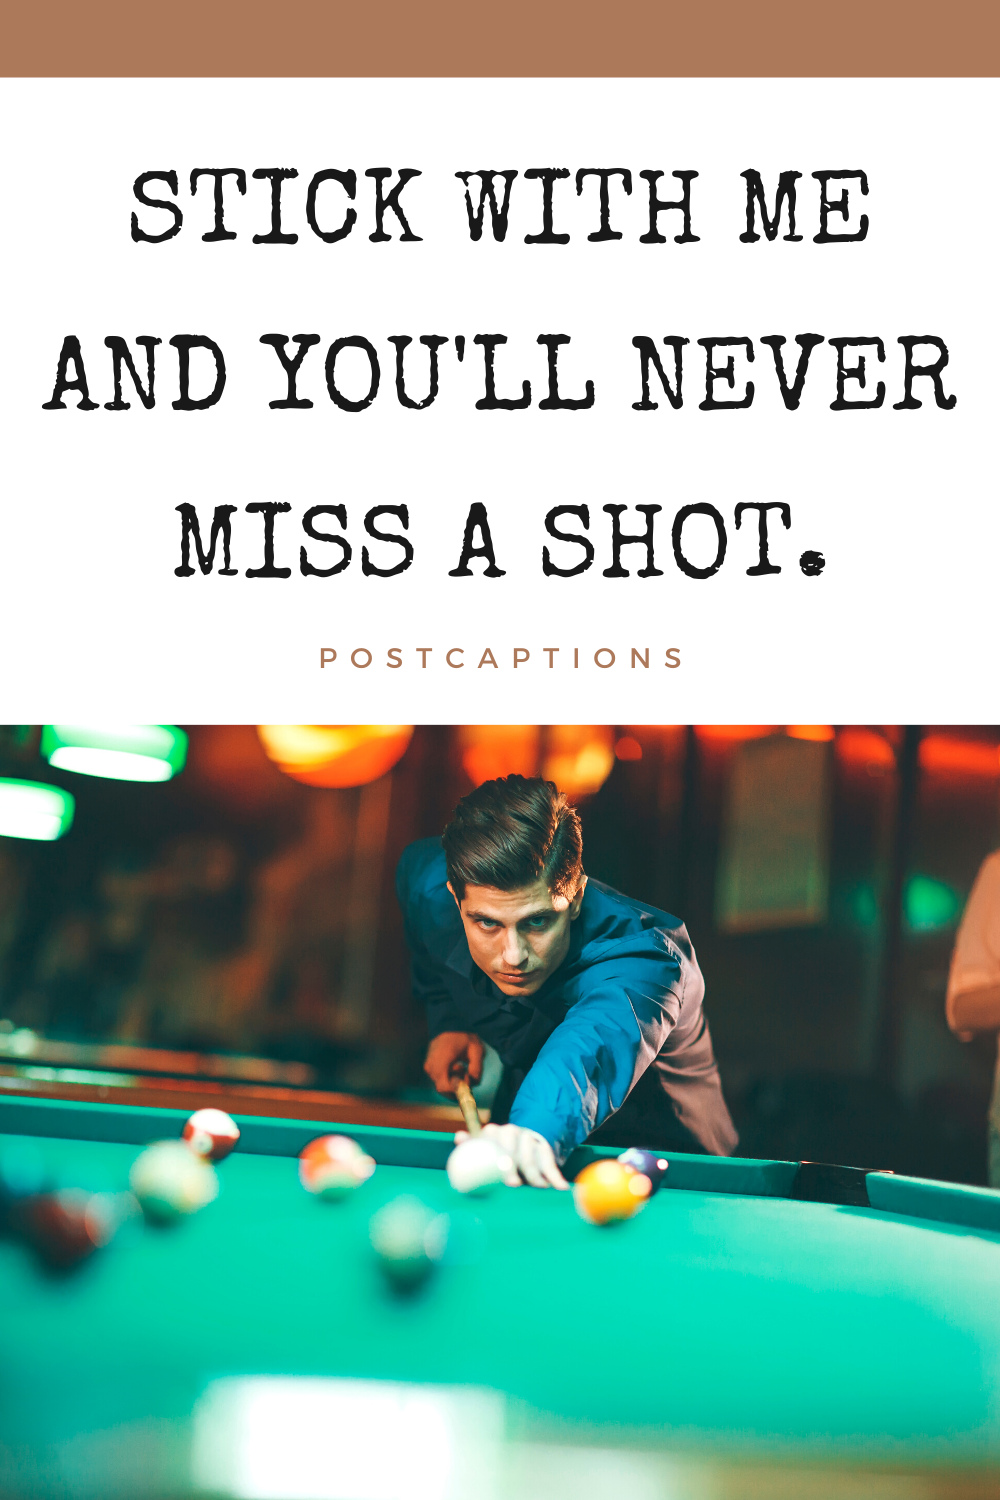 Pool Table Instagram Captions